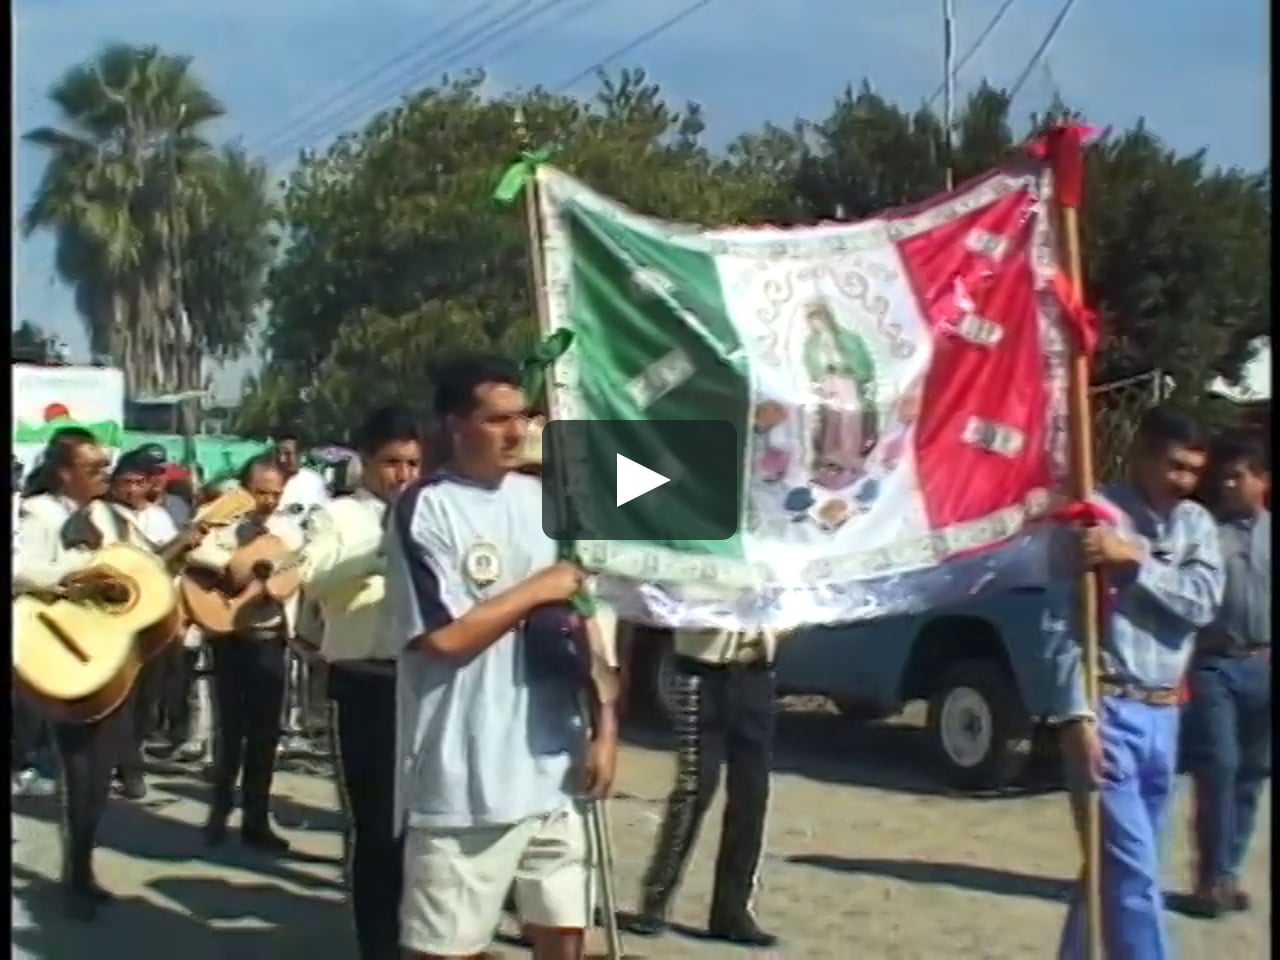 Dr. Odem introduces Rosa and Miguel, immigrants from Ejido Modelo Emiliano  Zapata in Jalisco, Mexico (1/8) on Vimeo